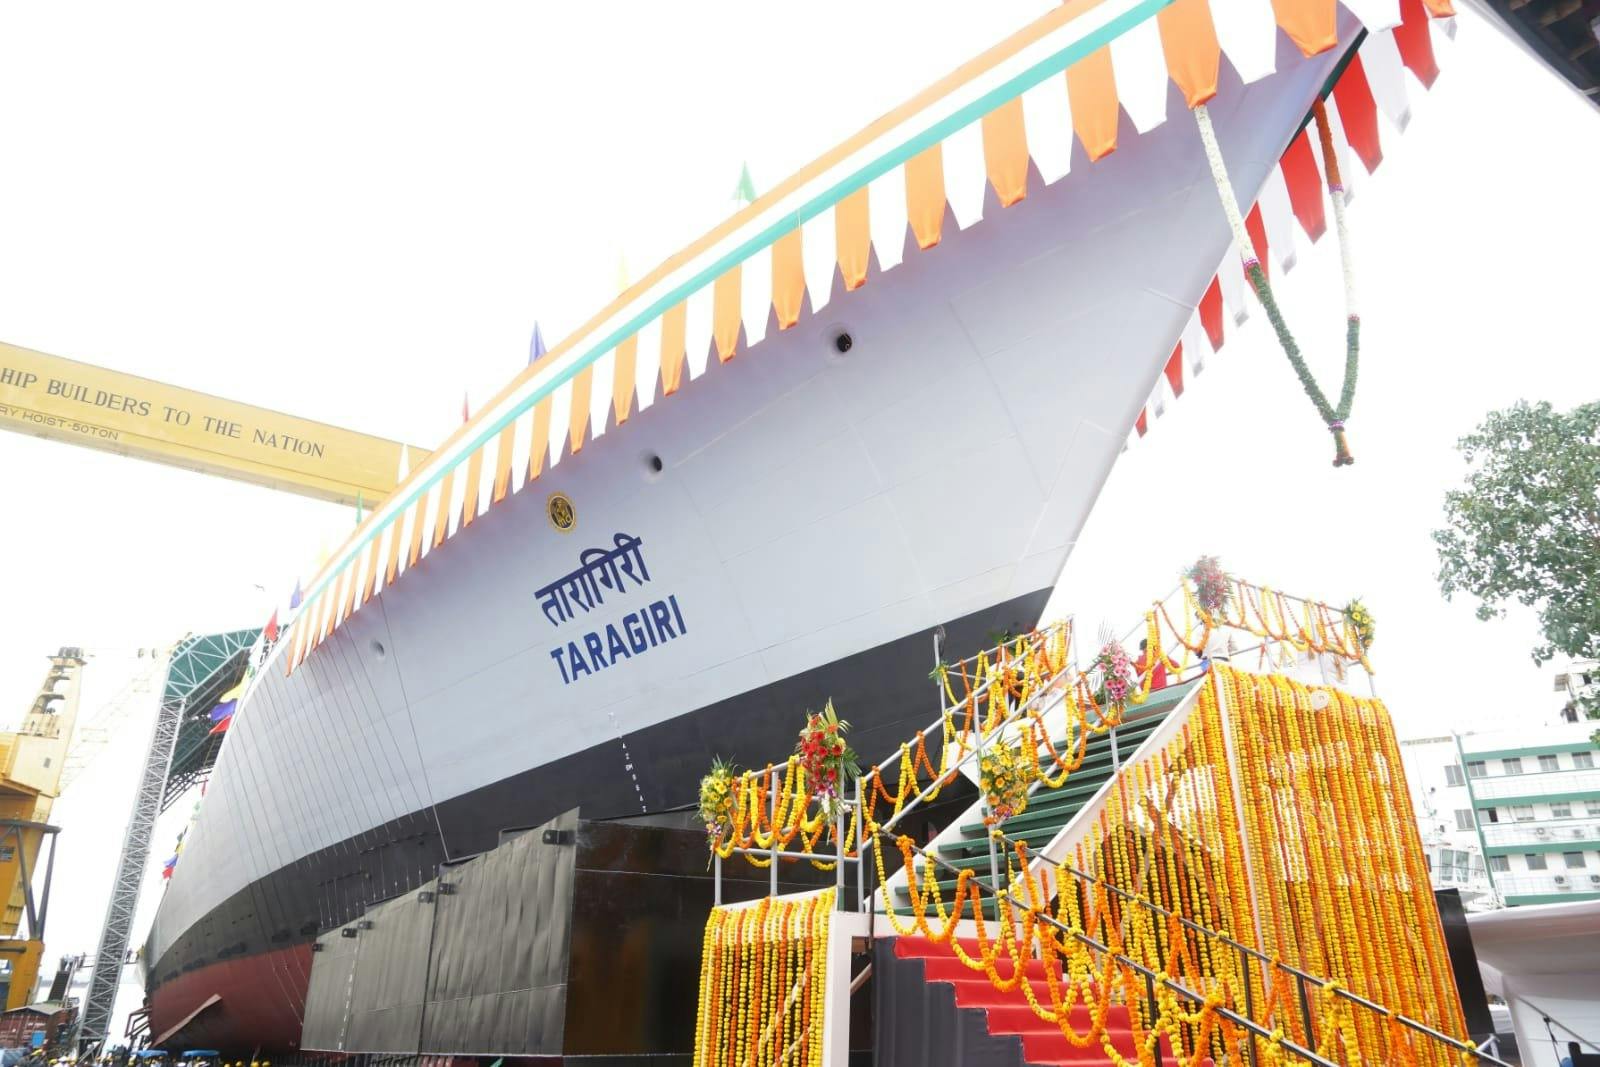 Taragiri Launched by the Indian Navy